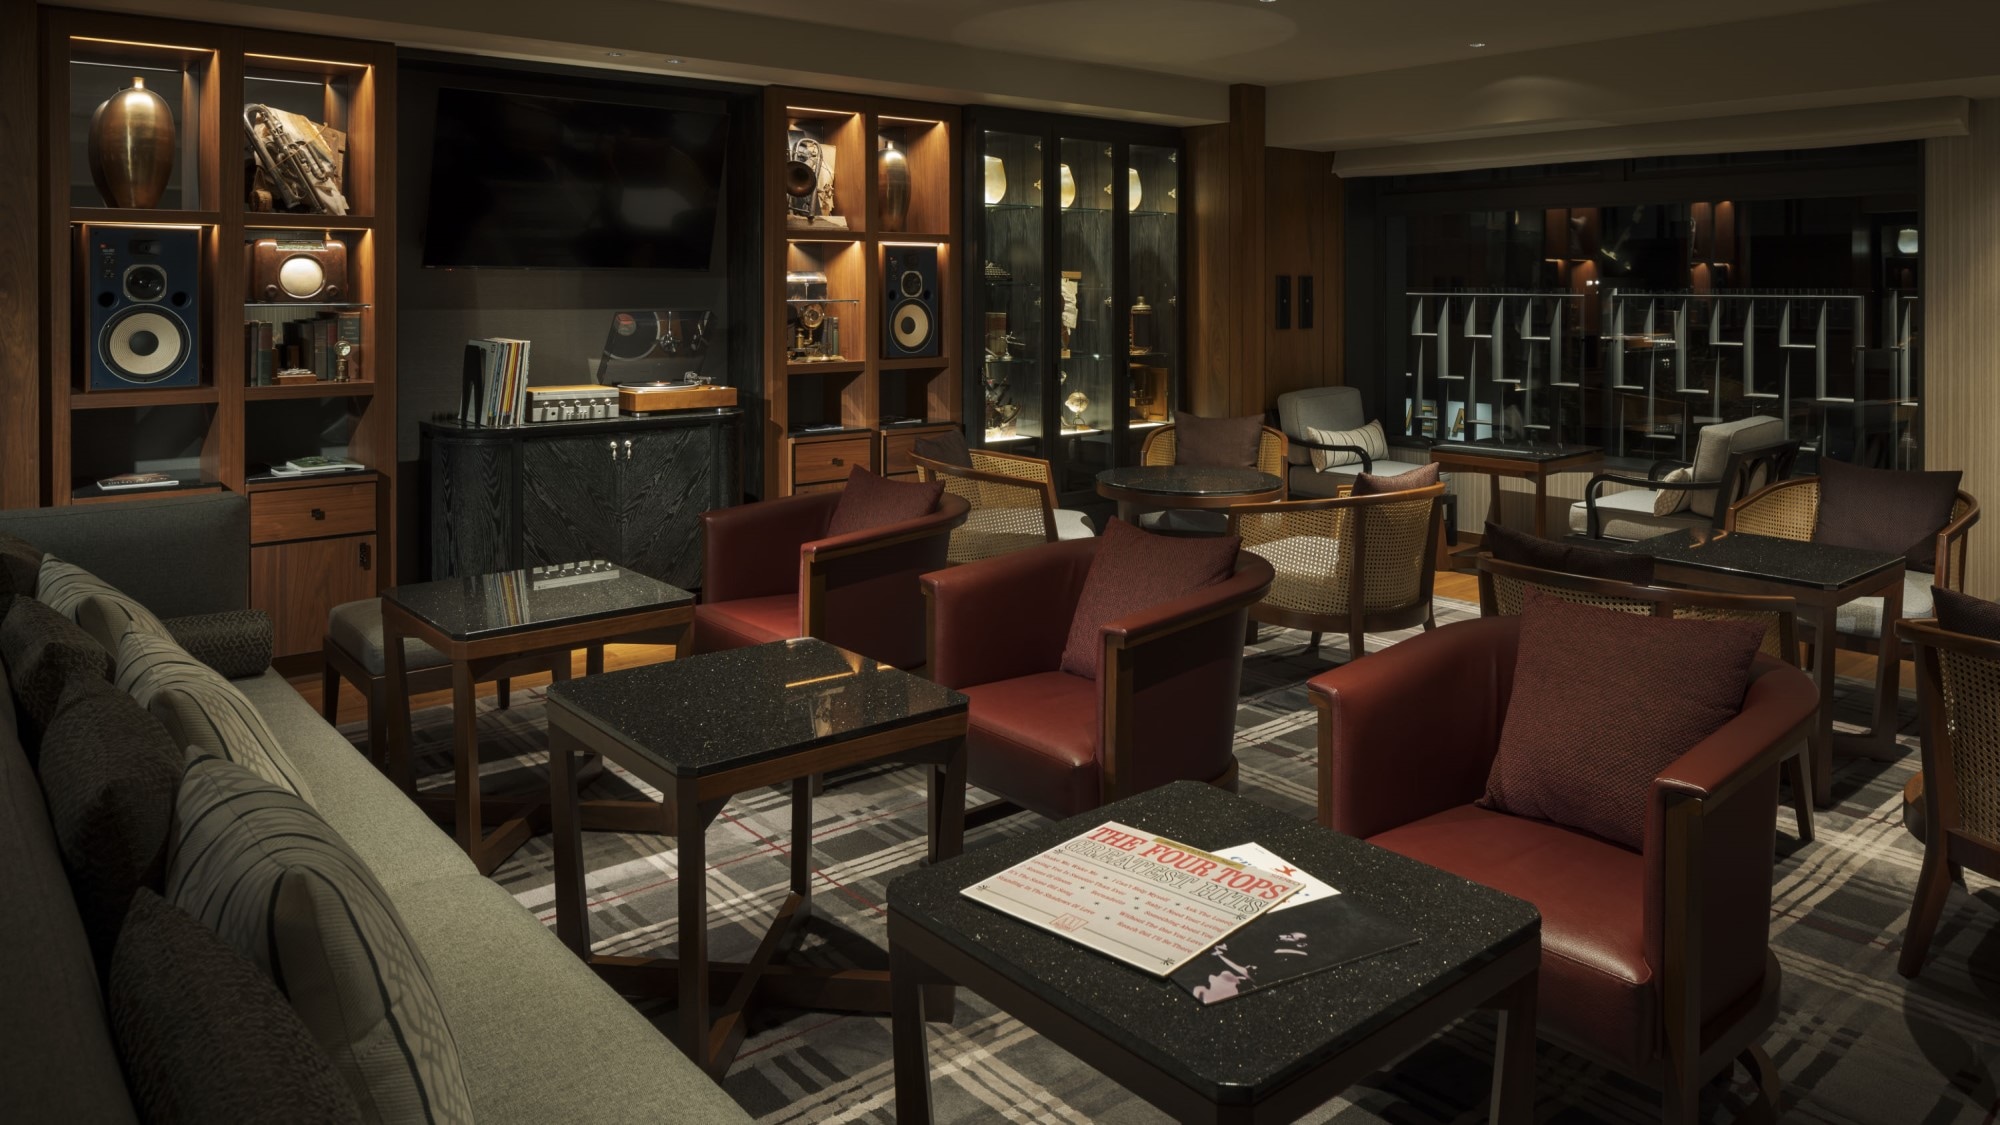 [Regency Club Lounge] Higher-grade hospitality with luxurious time and space